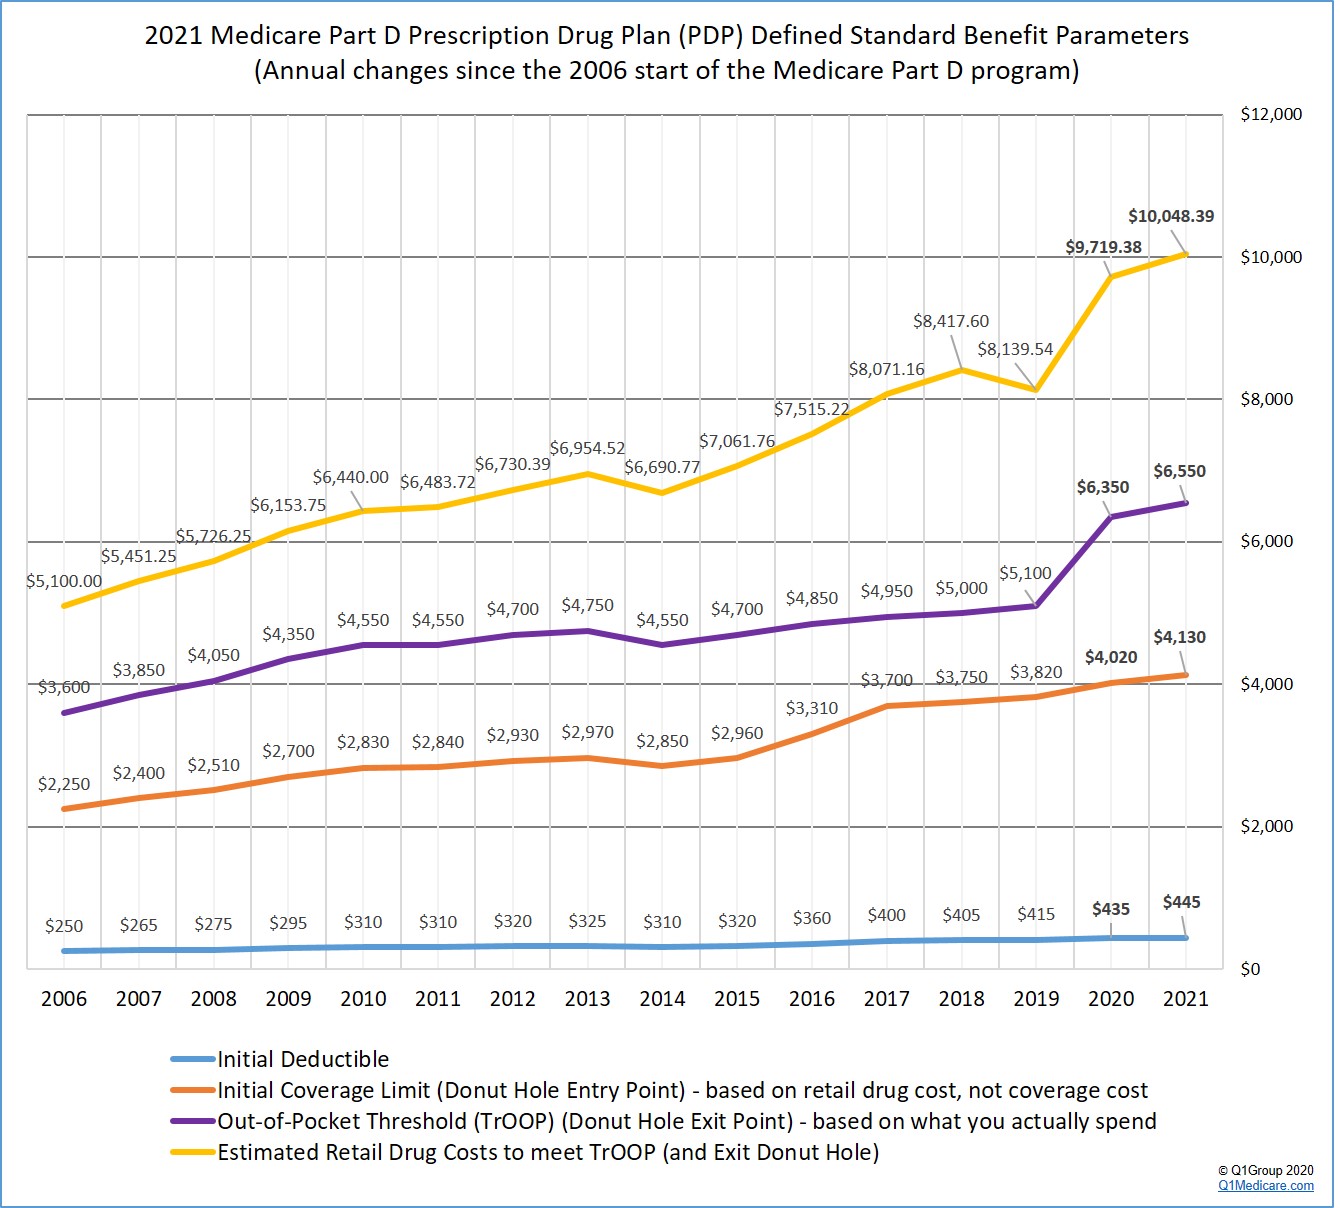 Changes in the standard Medicare Part D plan coverage since 2006